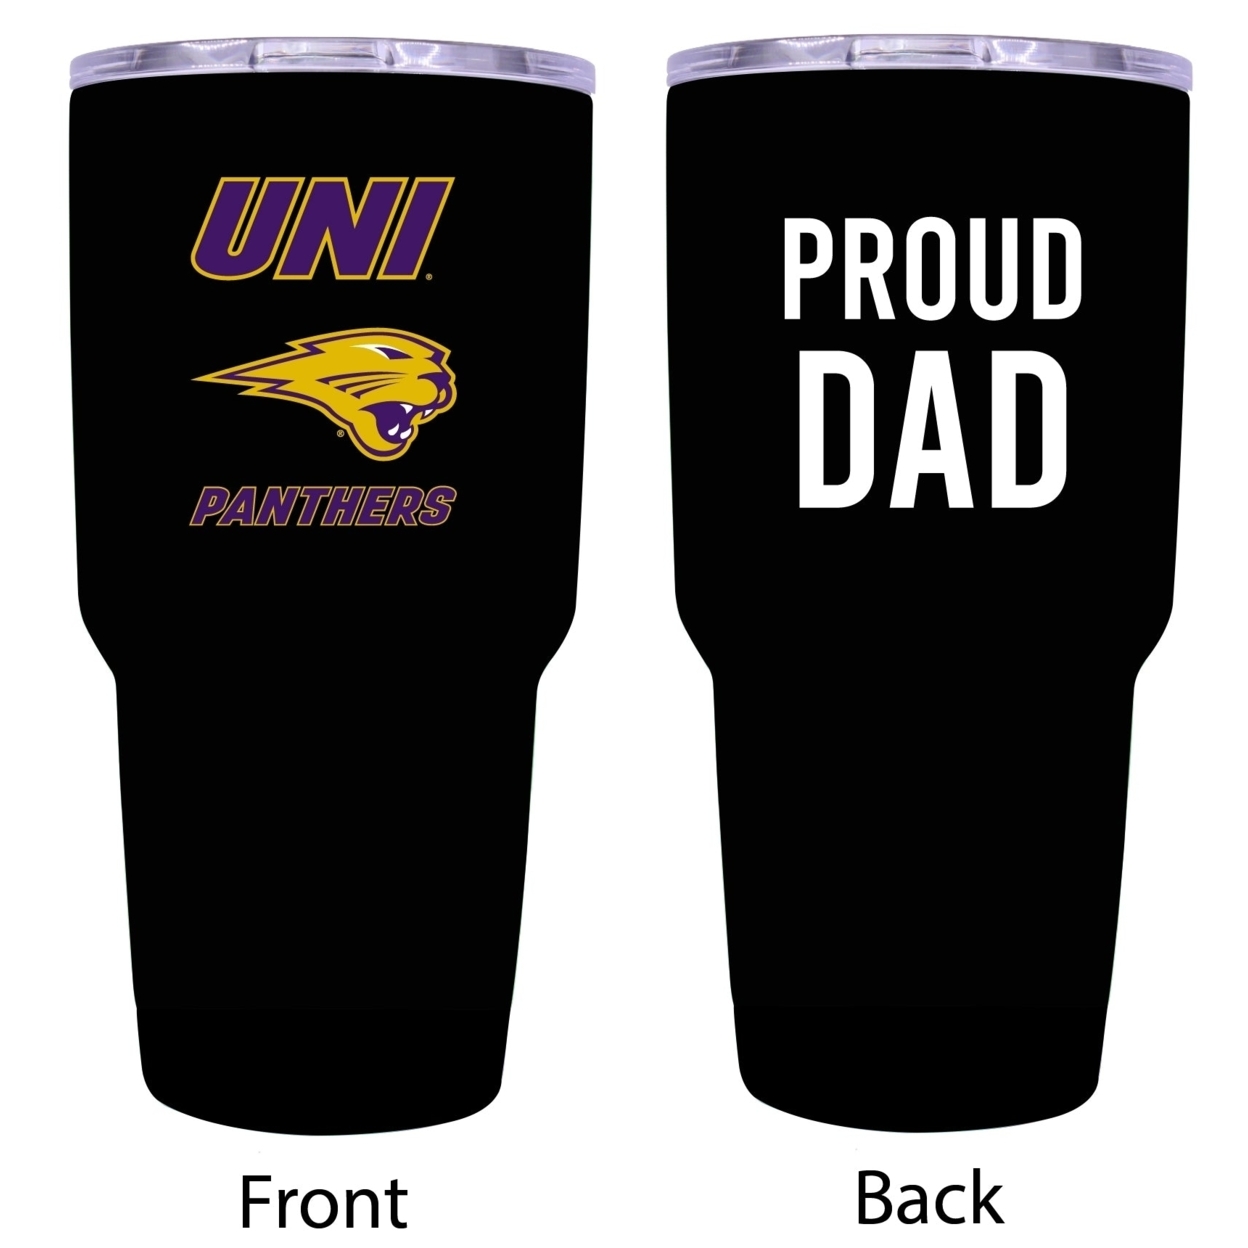 R And R Imports Northern Iowa Panthers Proud Dad 24 Oz Insulated Stainless Steel Tumblers Black.